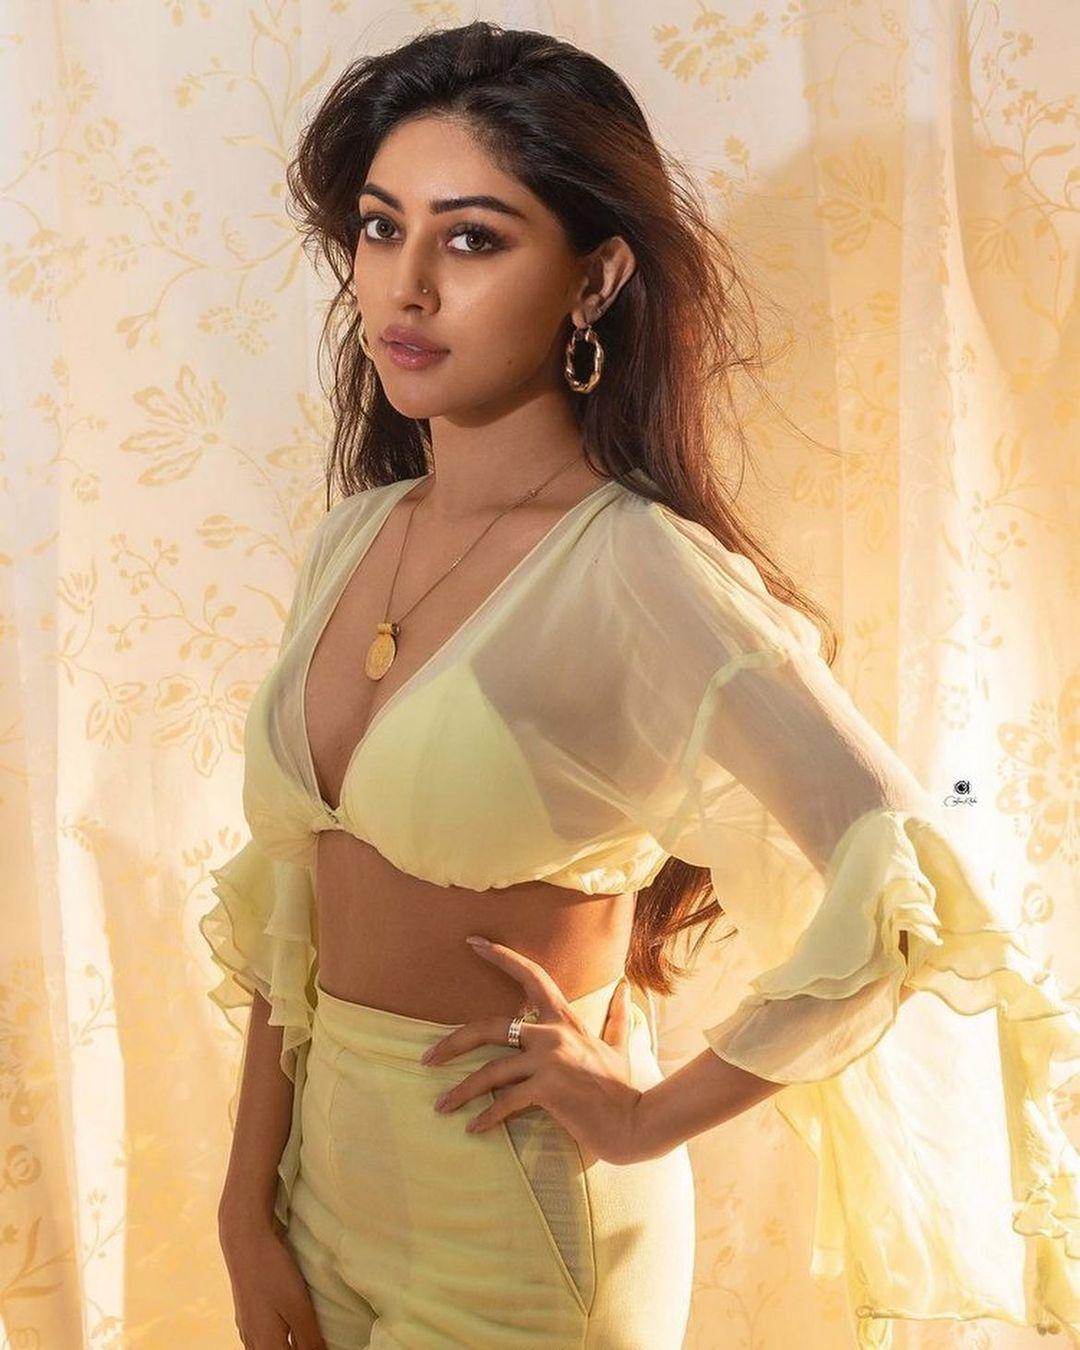 Anu Emmanuel Sex Video - Anu Emmanuel exposing cleavage in transparent yellow dress hot photos |Anu  Emmanuel latest hot and sexy photoshoot Photos: HD Images, Pictures,  Stills, First Look Posters of Anu Emmanuel exposing cleavage in transparent